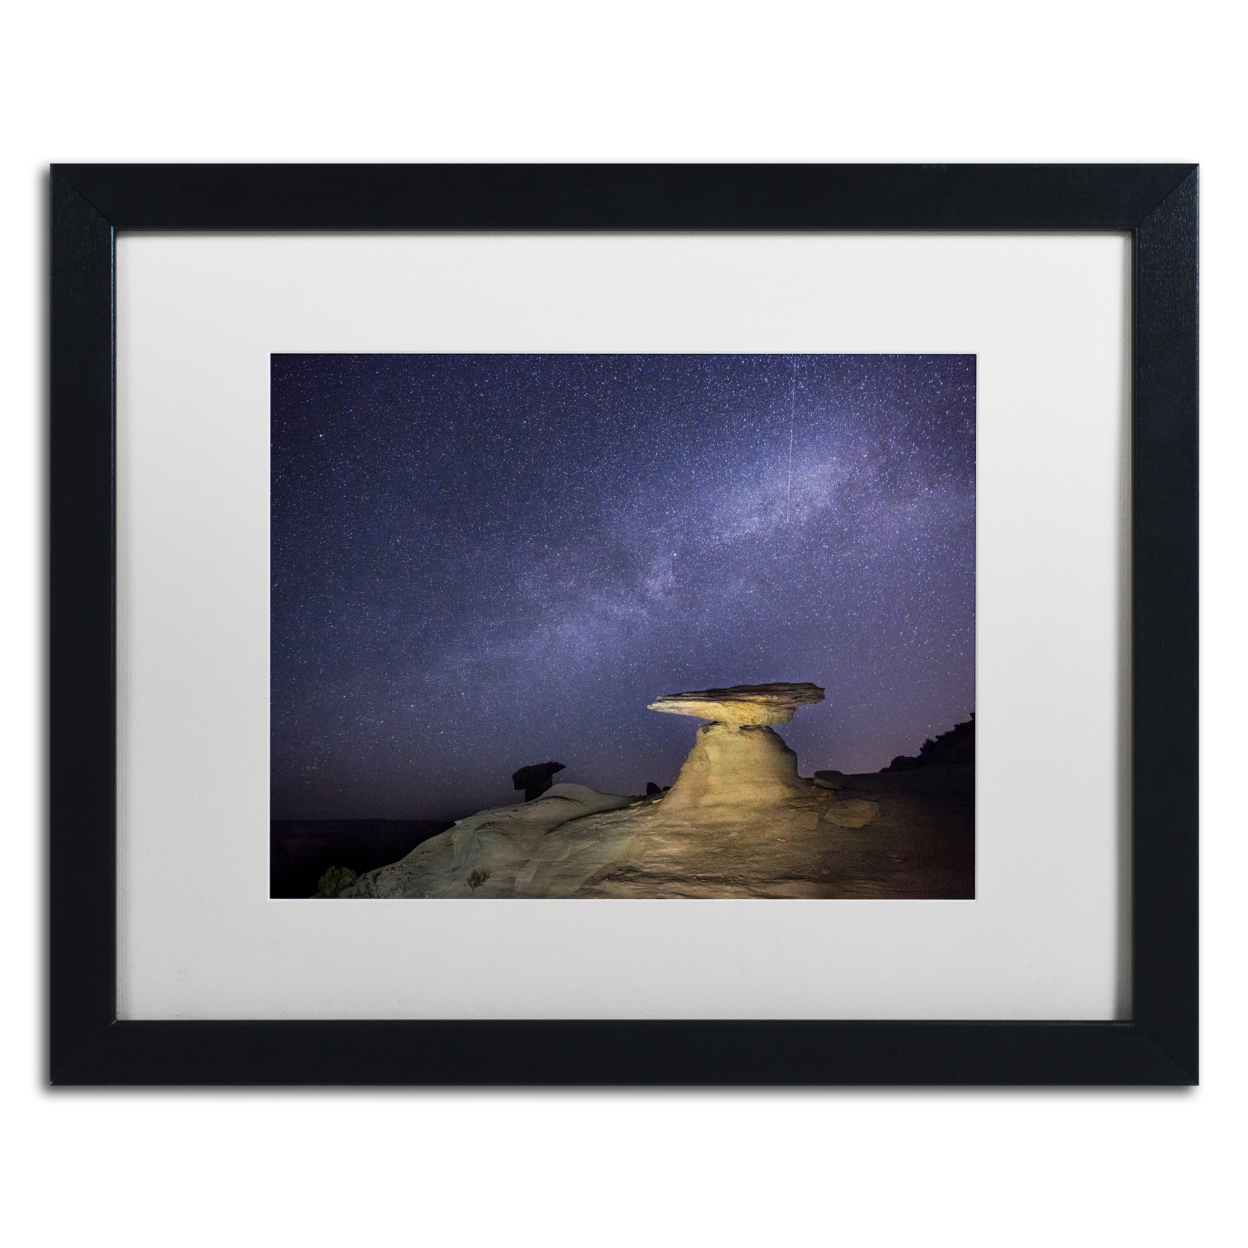 Moises Levy 'Starry Night In Arizona III' Black Wooden Framed Art 18 X 22 Inches